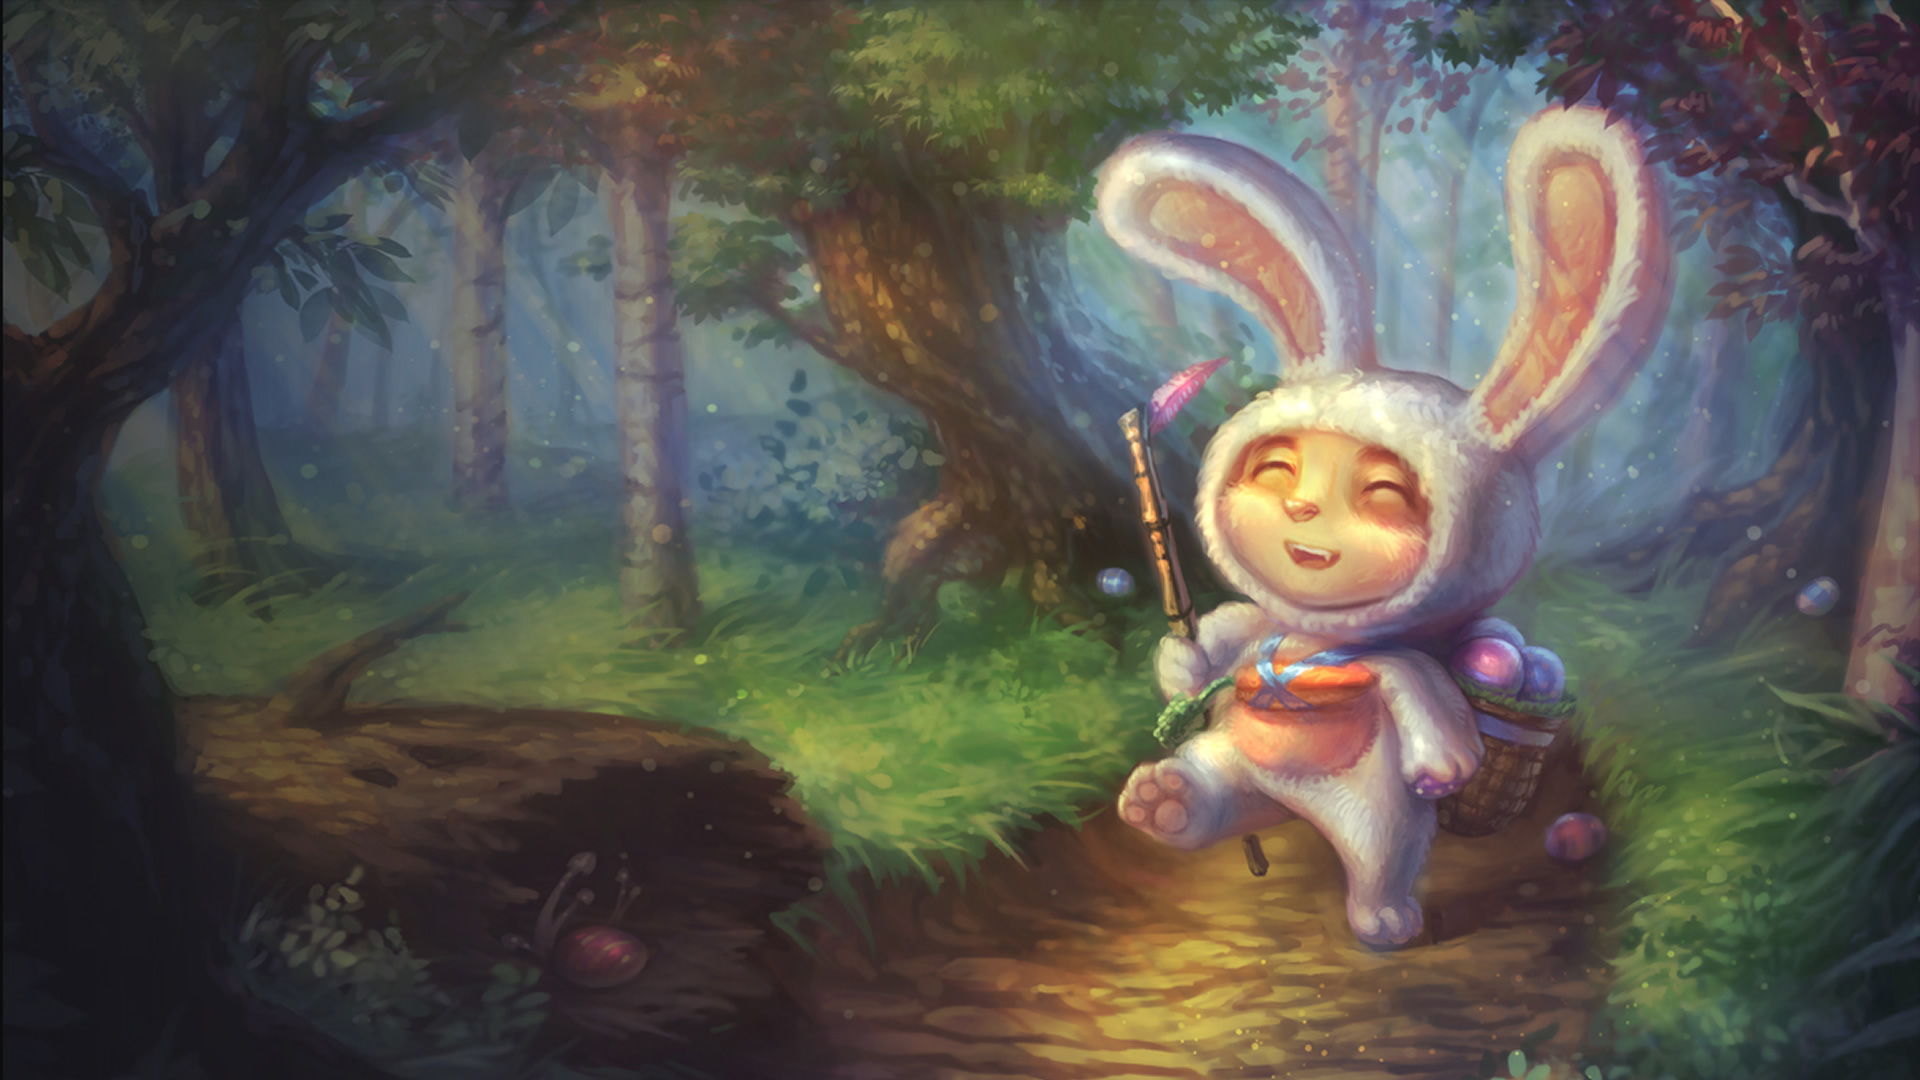 Fullsize Image - Cottontail Teemo , HD Wallpaper & Backgrounds